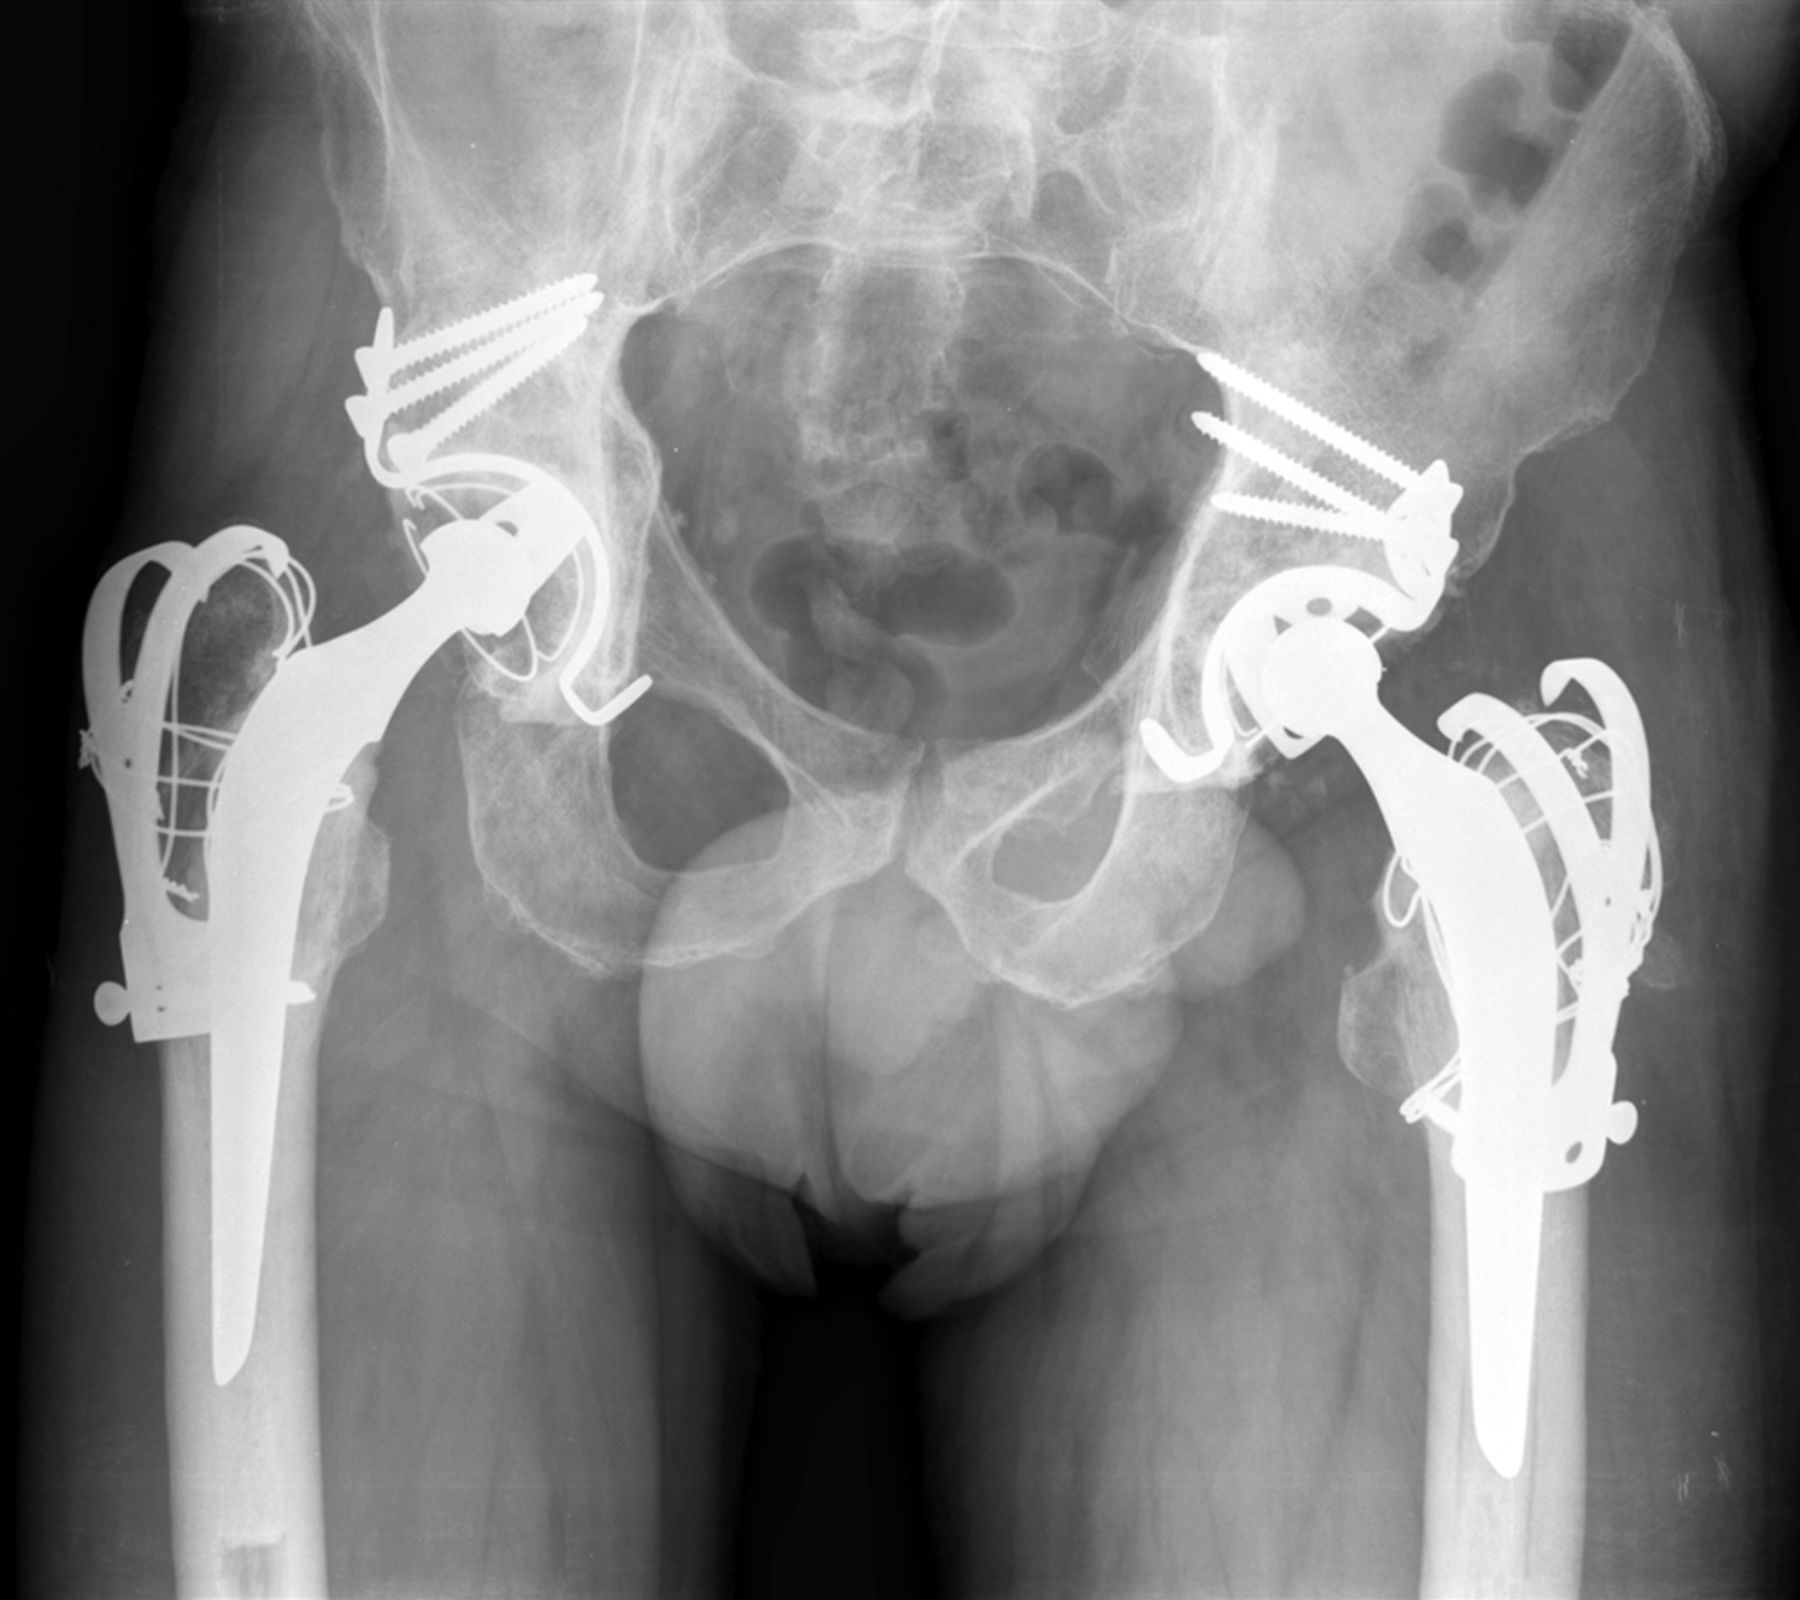 Figs. 2a - 2b 
          Anteroposterior radiographs of a
52-year-old patient a) 57 months after pelvic irradiation for cancer
of the ureter showing osteonecrosis of the acetabulum with a protrusion
of the right femoral head and the same patient b) 51 months after right
cemented total hip arthroplasty (THA) with a reinforcement cross
and 44 months after left THA for osteonecrosis of the femoral head.
        